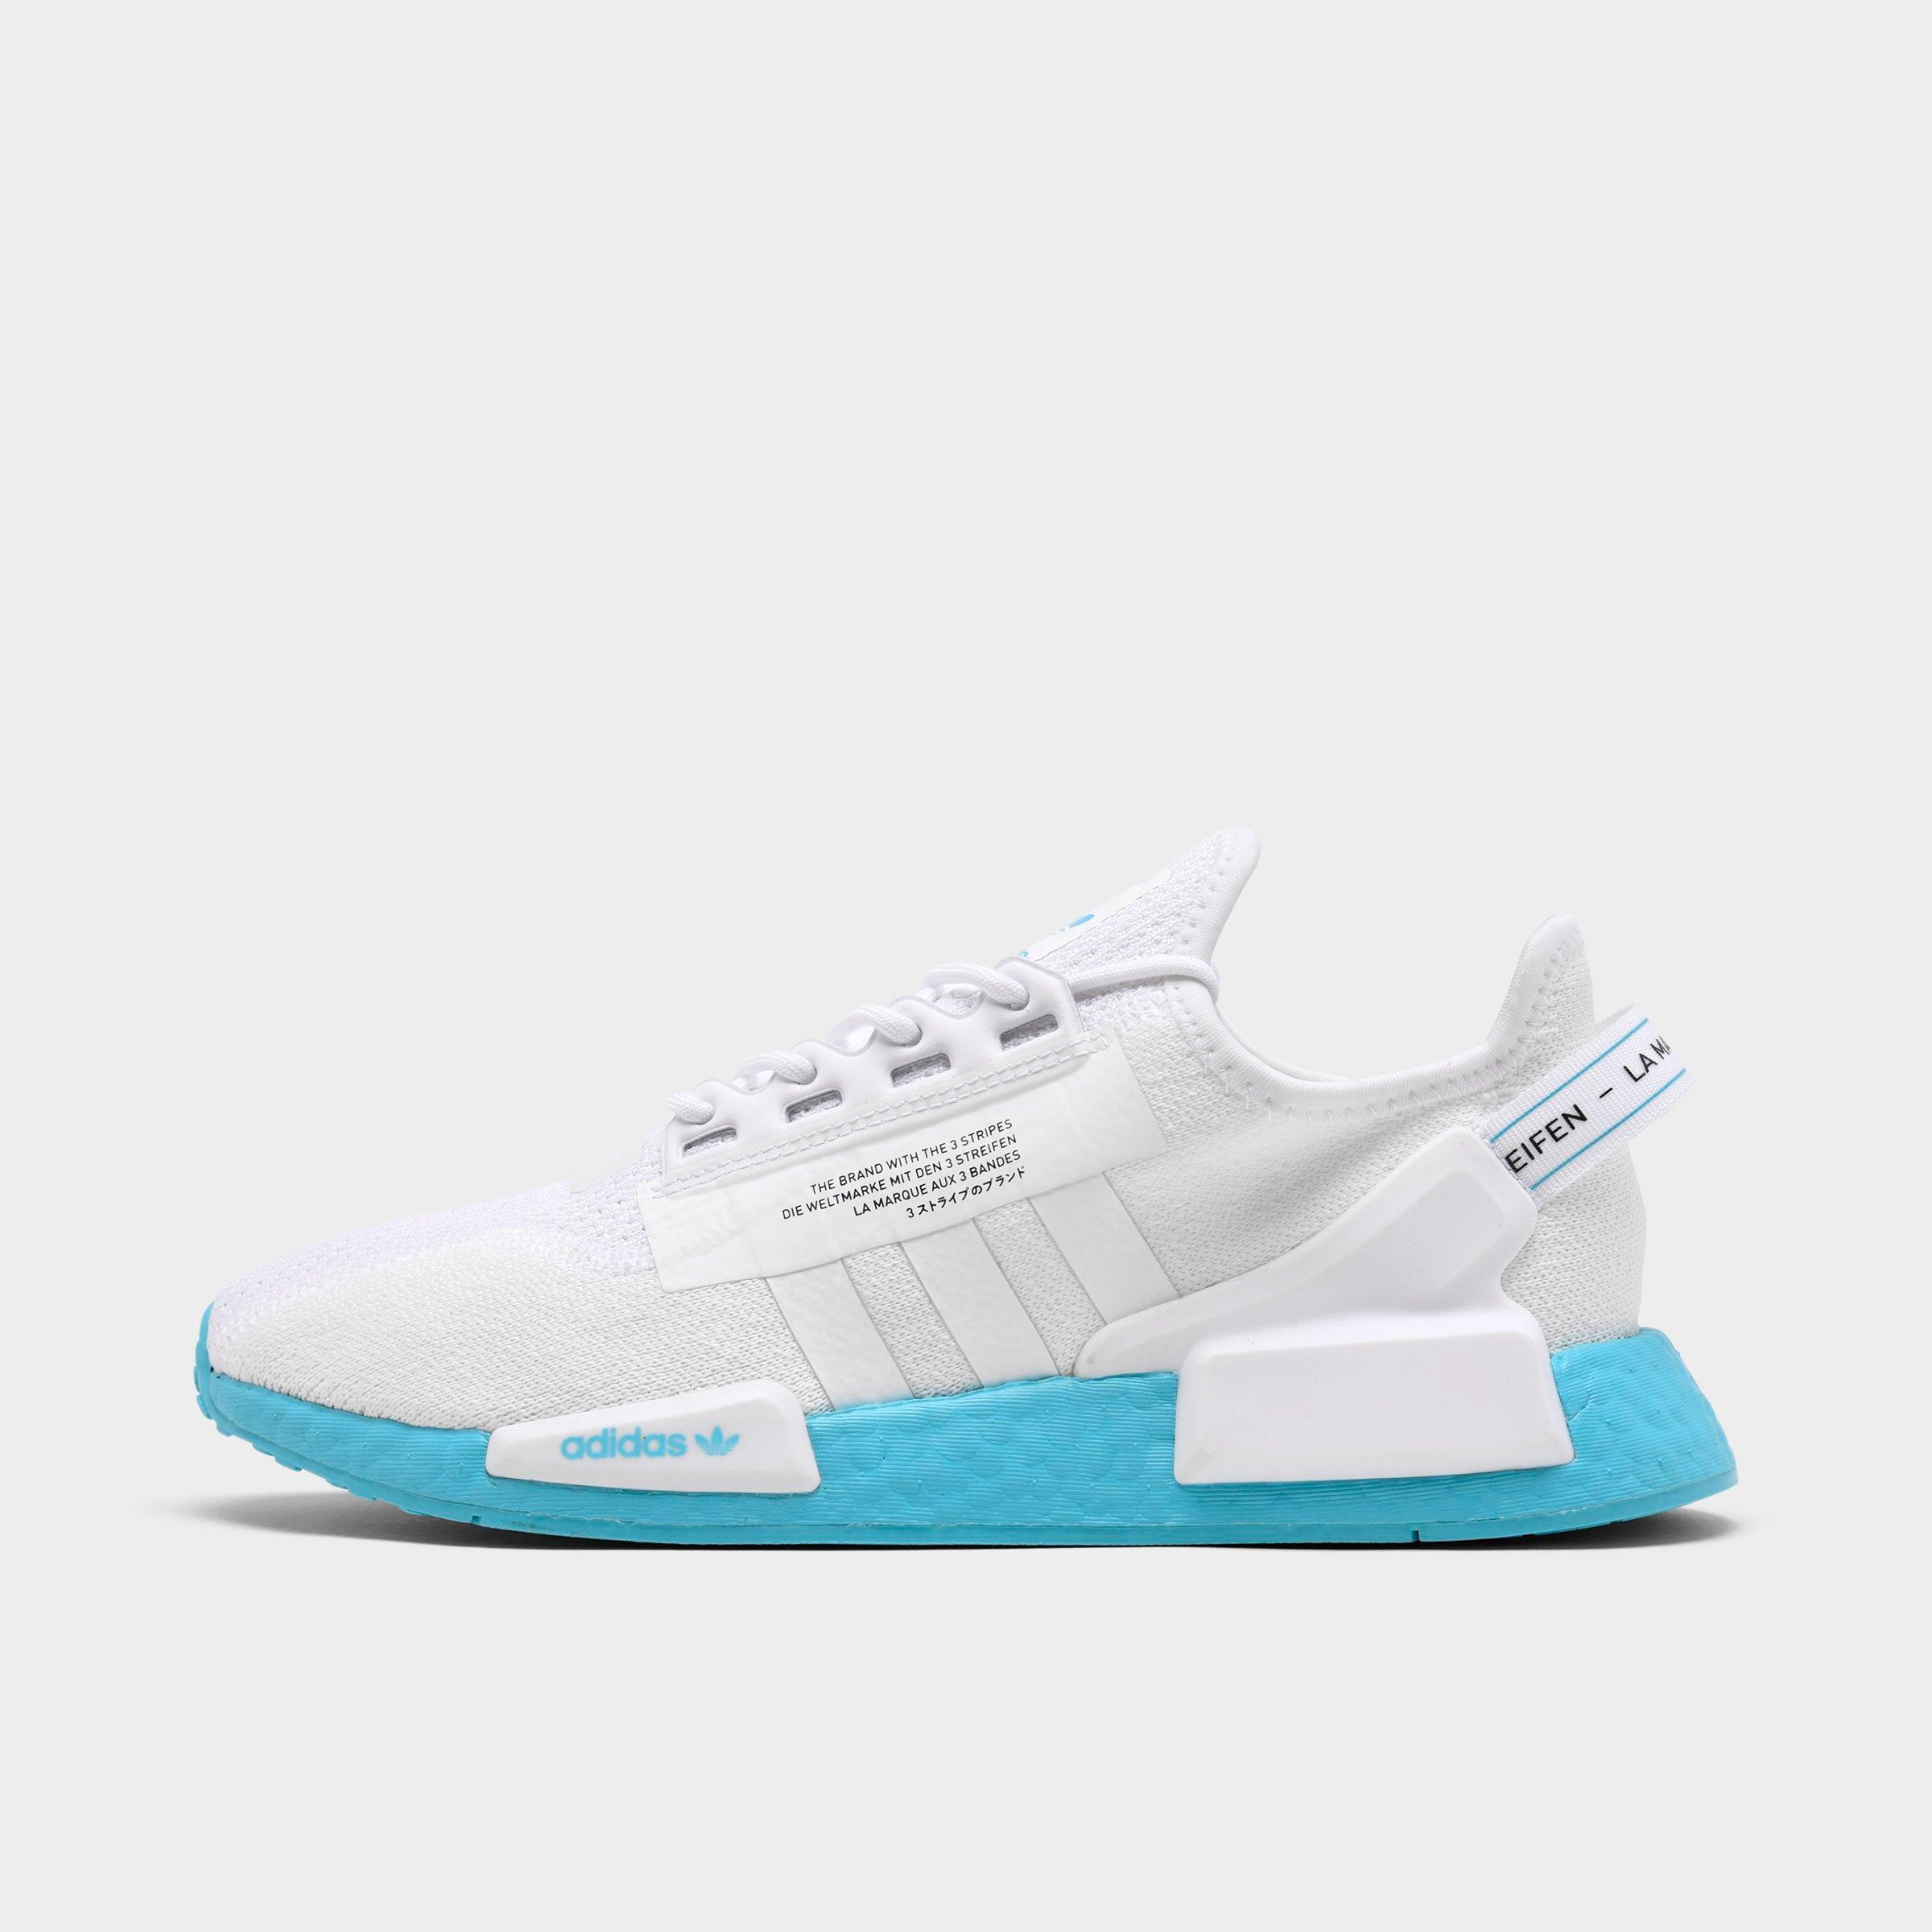 jordanshoes18 on Sneakers Shoes Adidas nmd r1 Pinterest